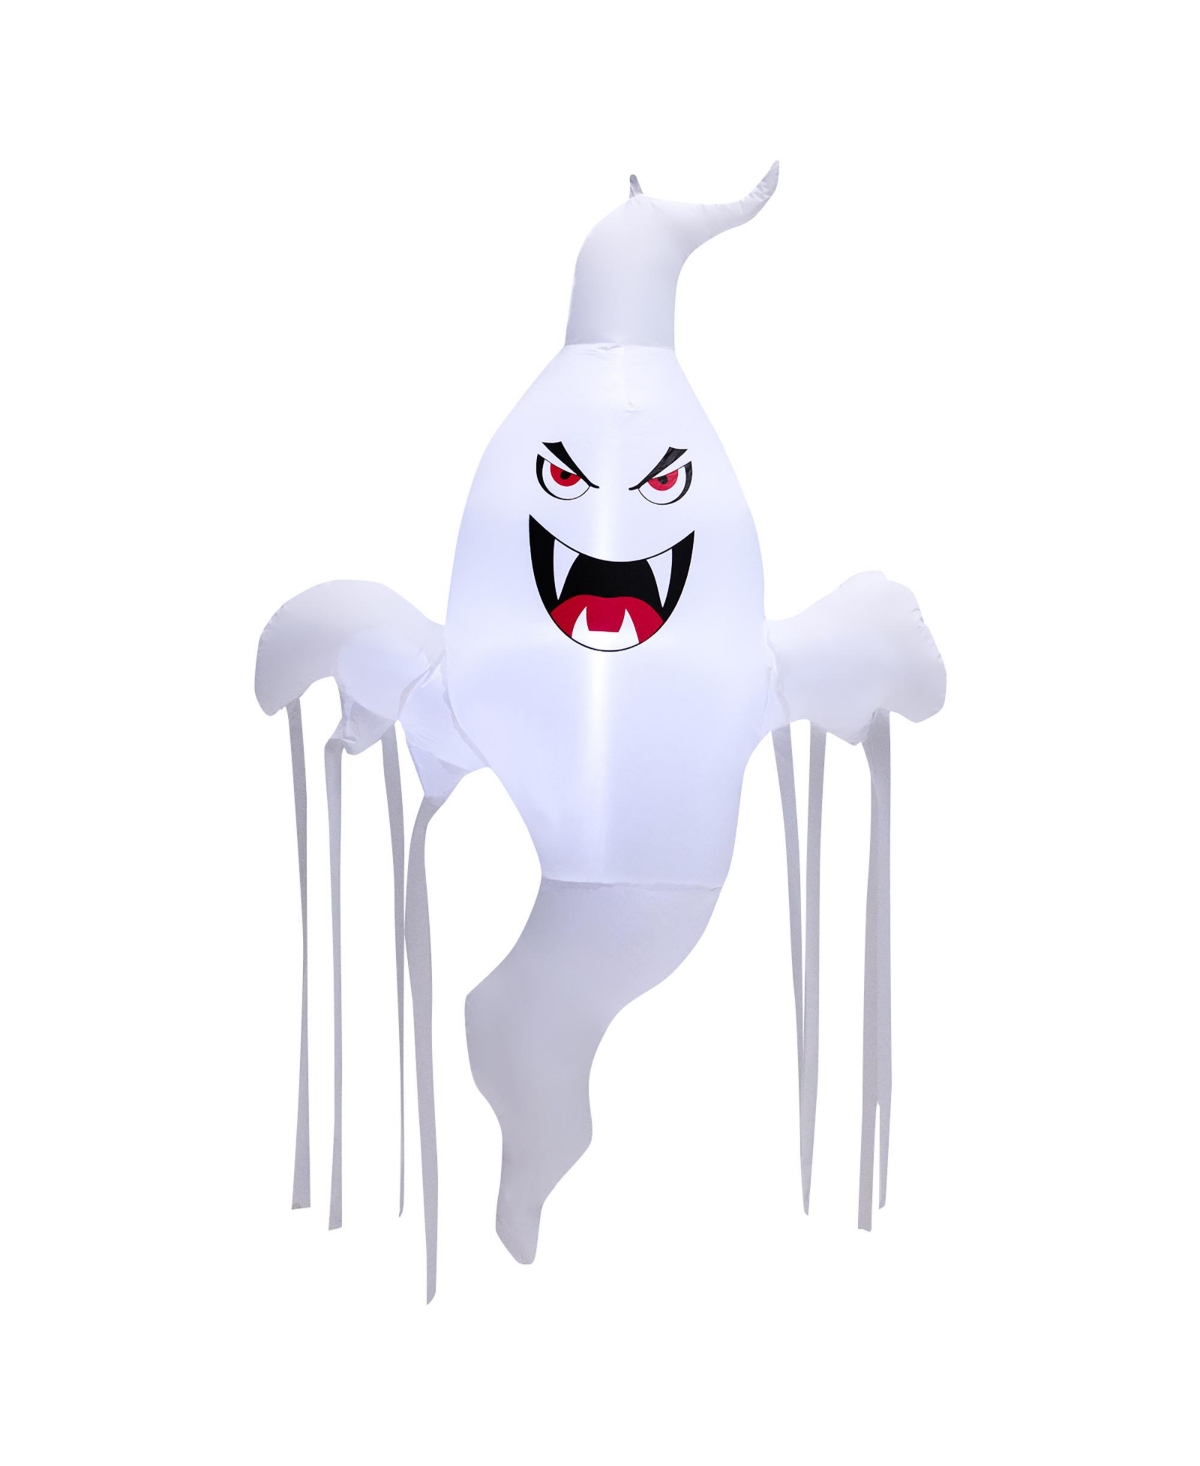 5 Ft Tall Halloween Inflatable Hanging Ghost Blow-up Yard Decoration w/Led Light - White